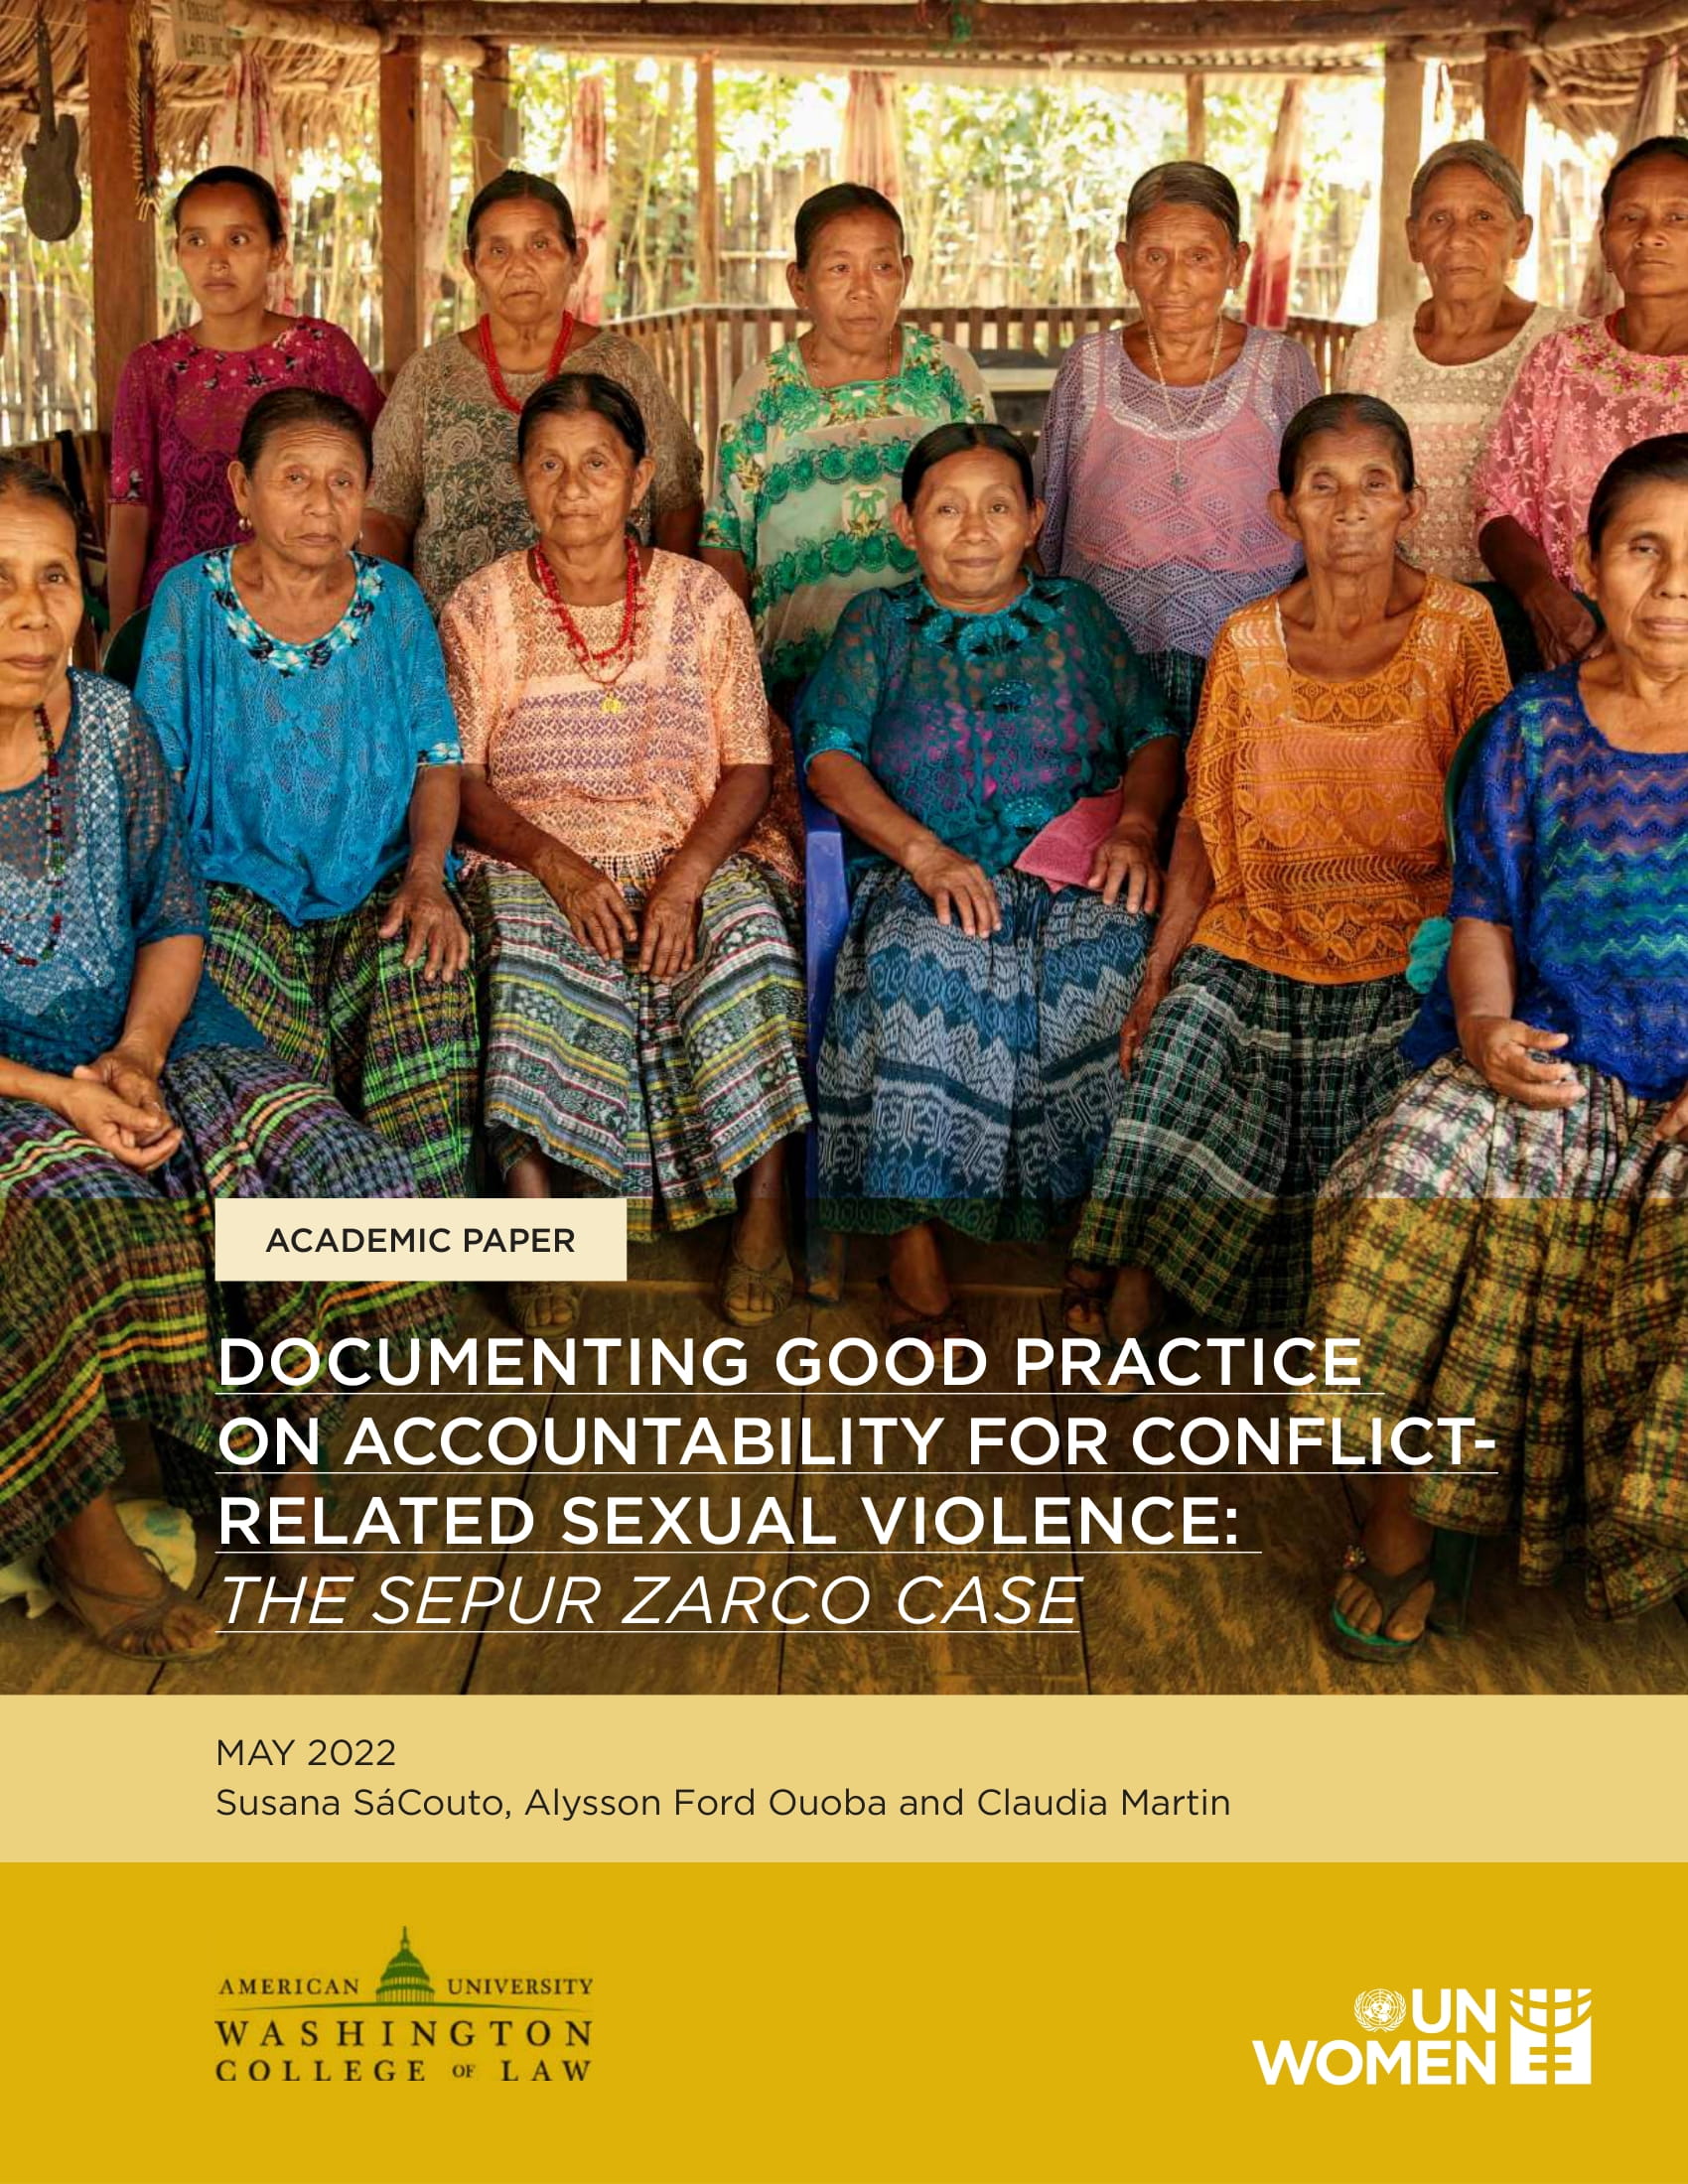 Documenting Good Practice on Accountability for Conflict-Related Sexual Violence: the Sepur Zarco Case